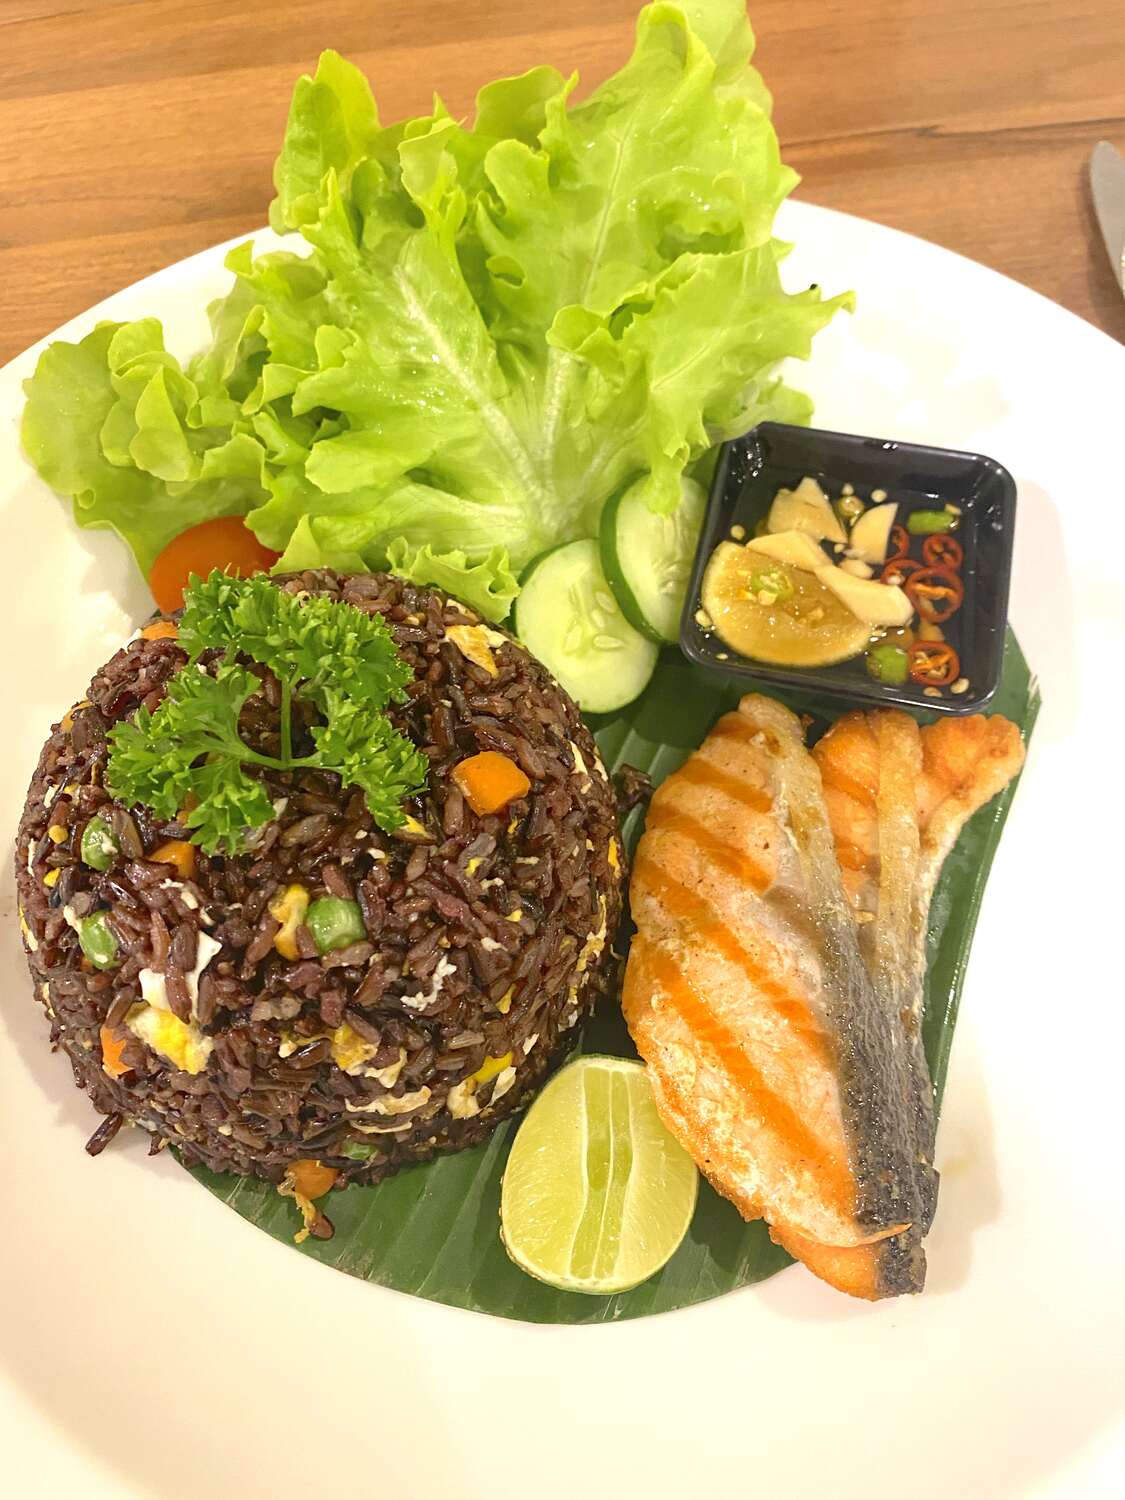 Lunch at Salad Concept with salmon and rice